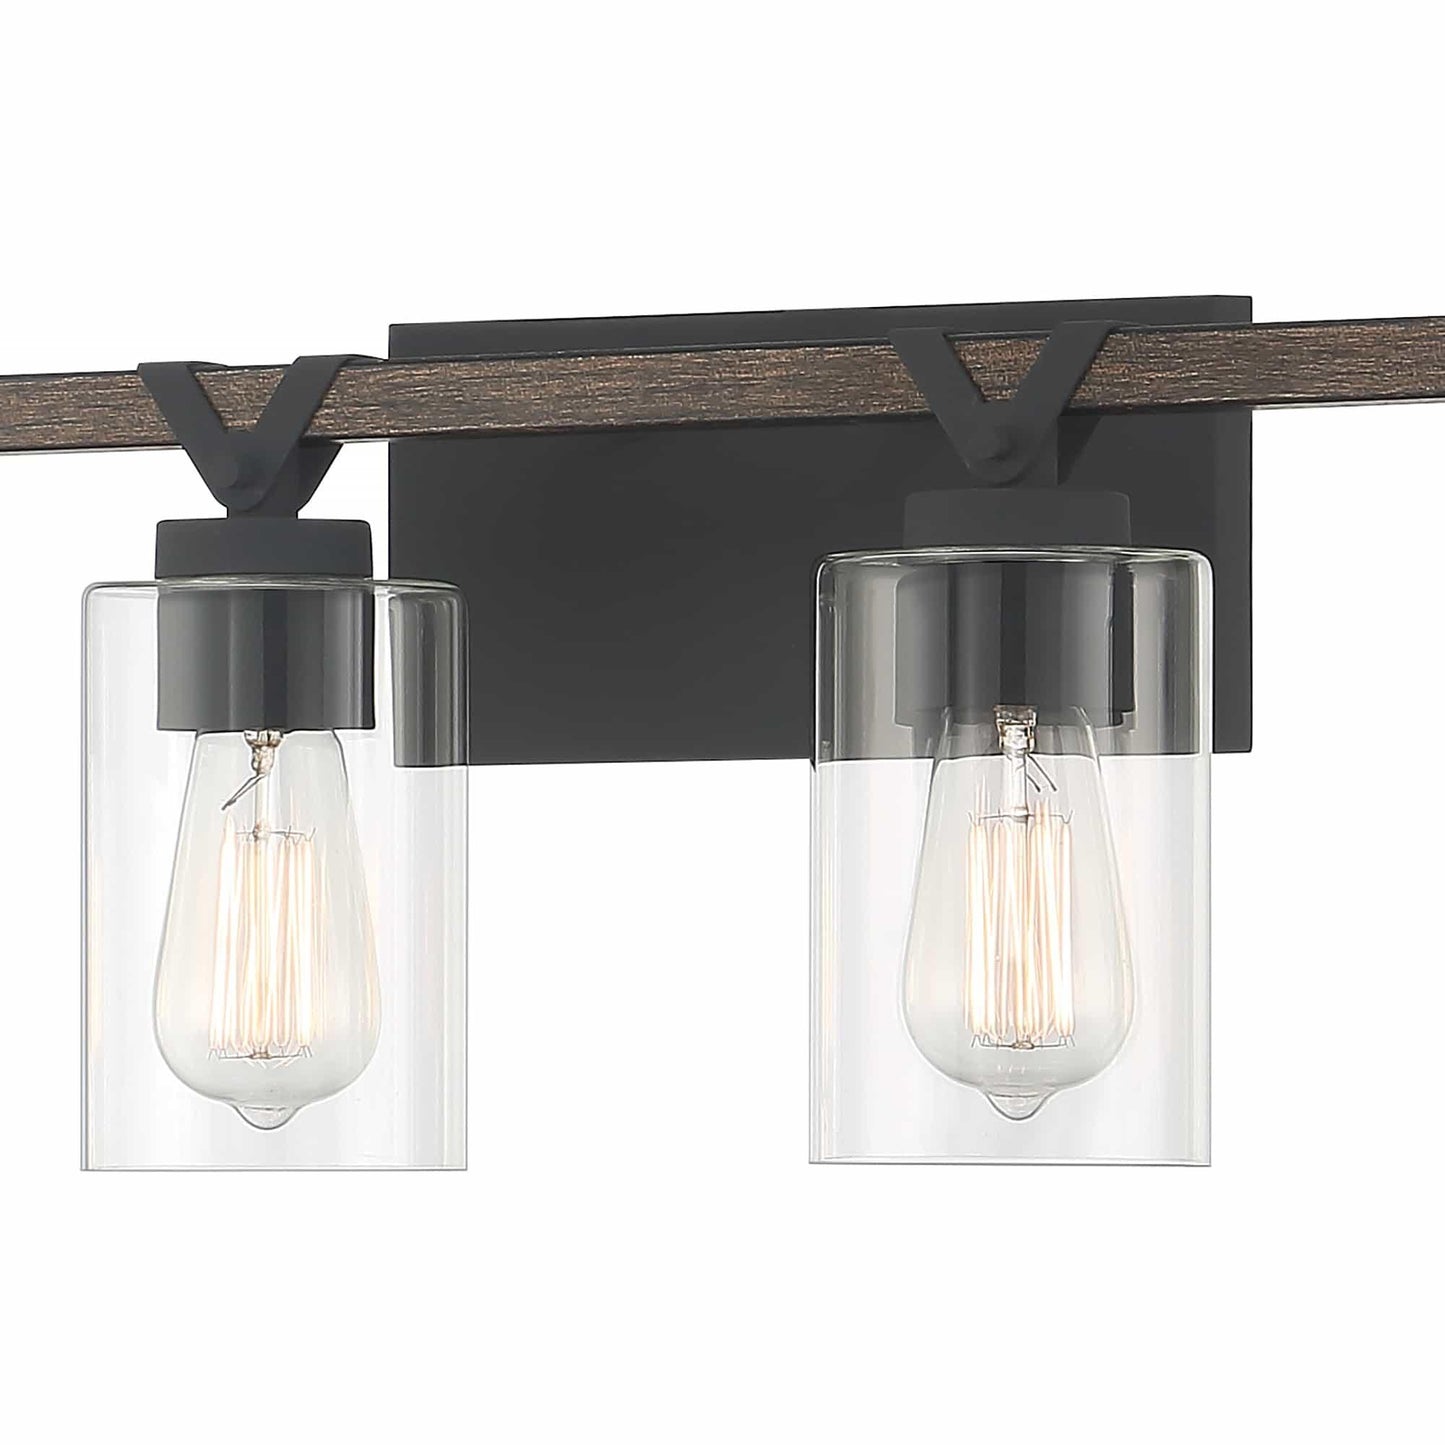 7806 | 6 - Light Dimmable Vanity Light by ACROMA™ - ACROMA